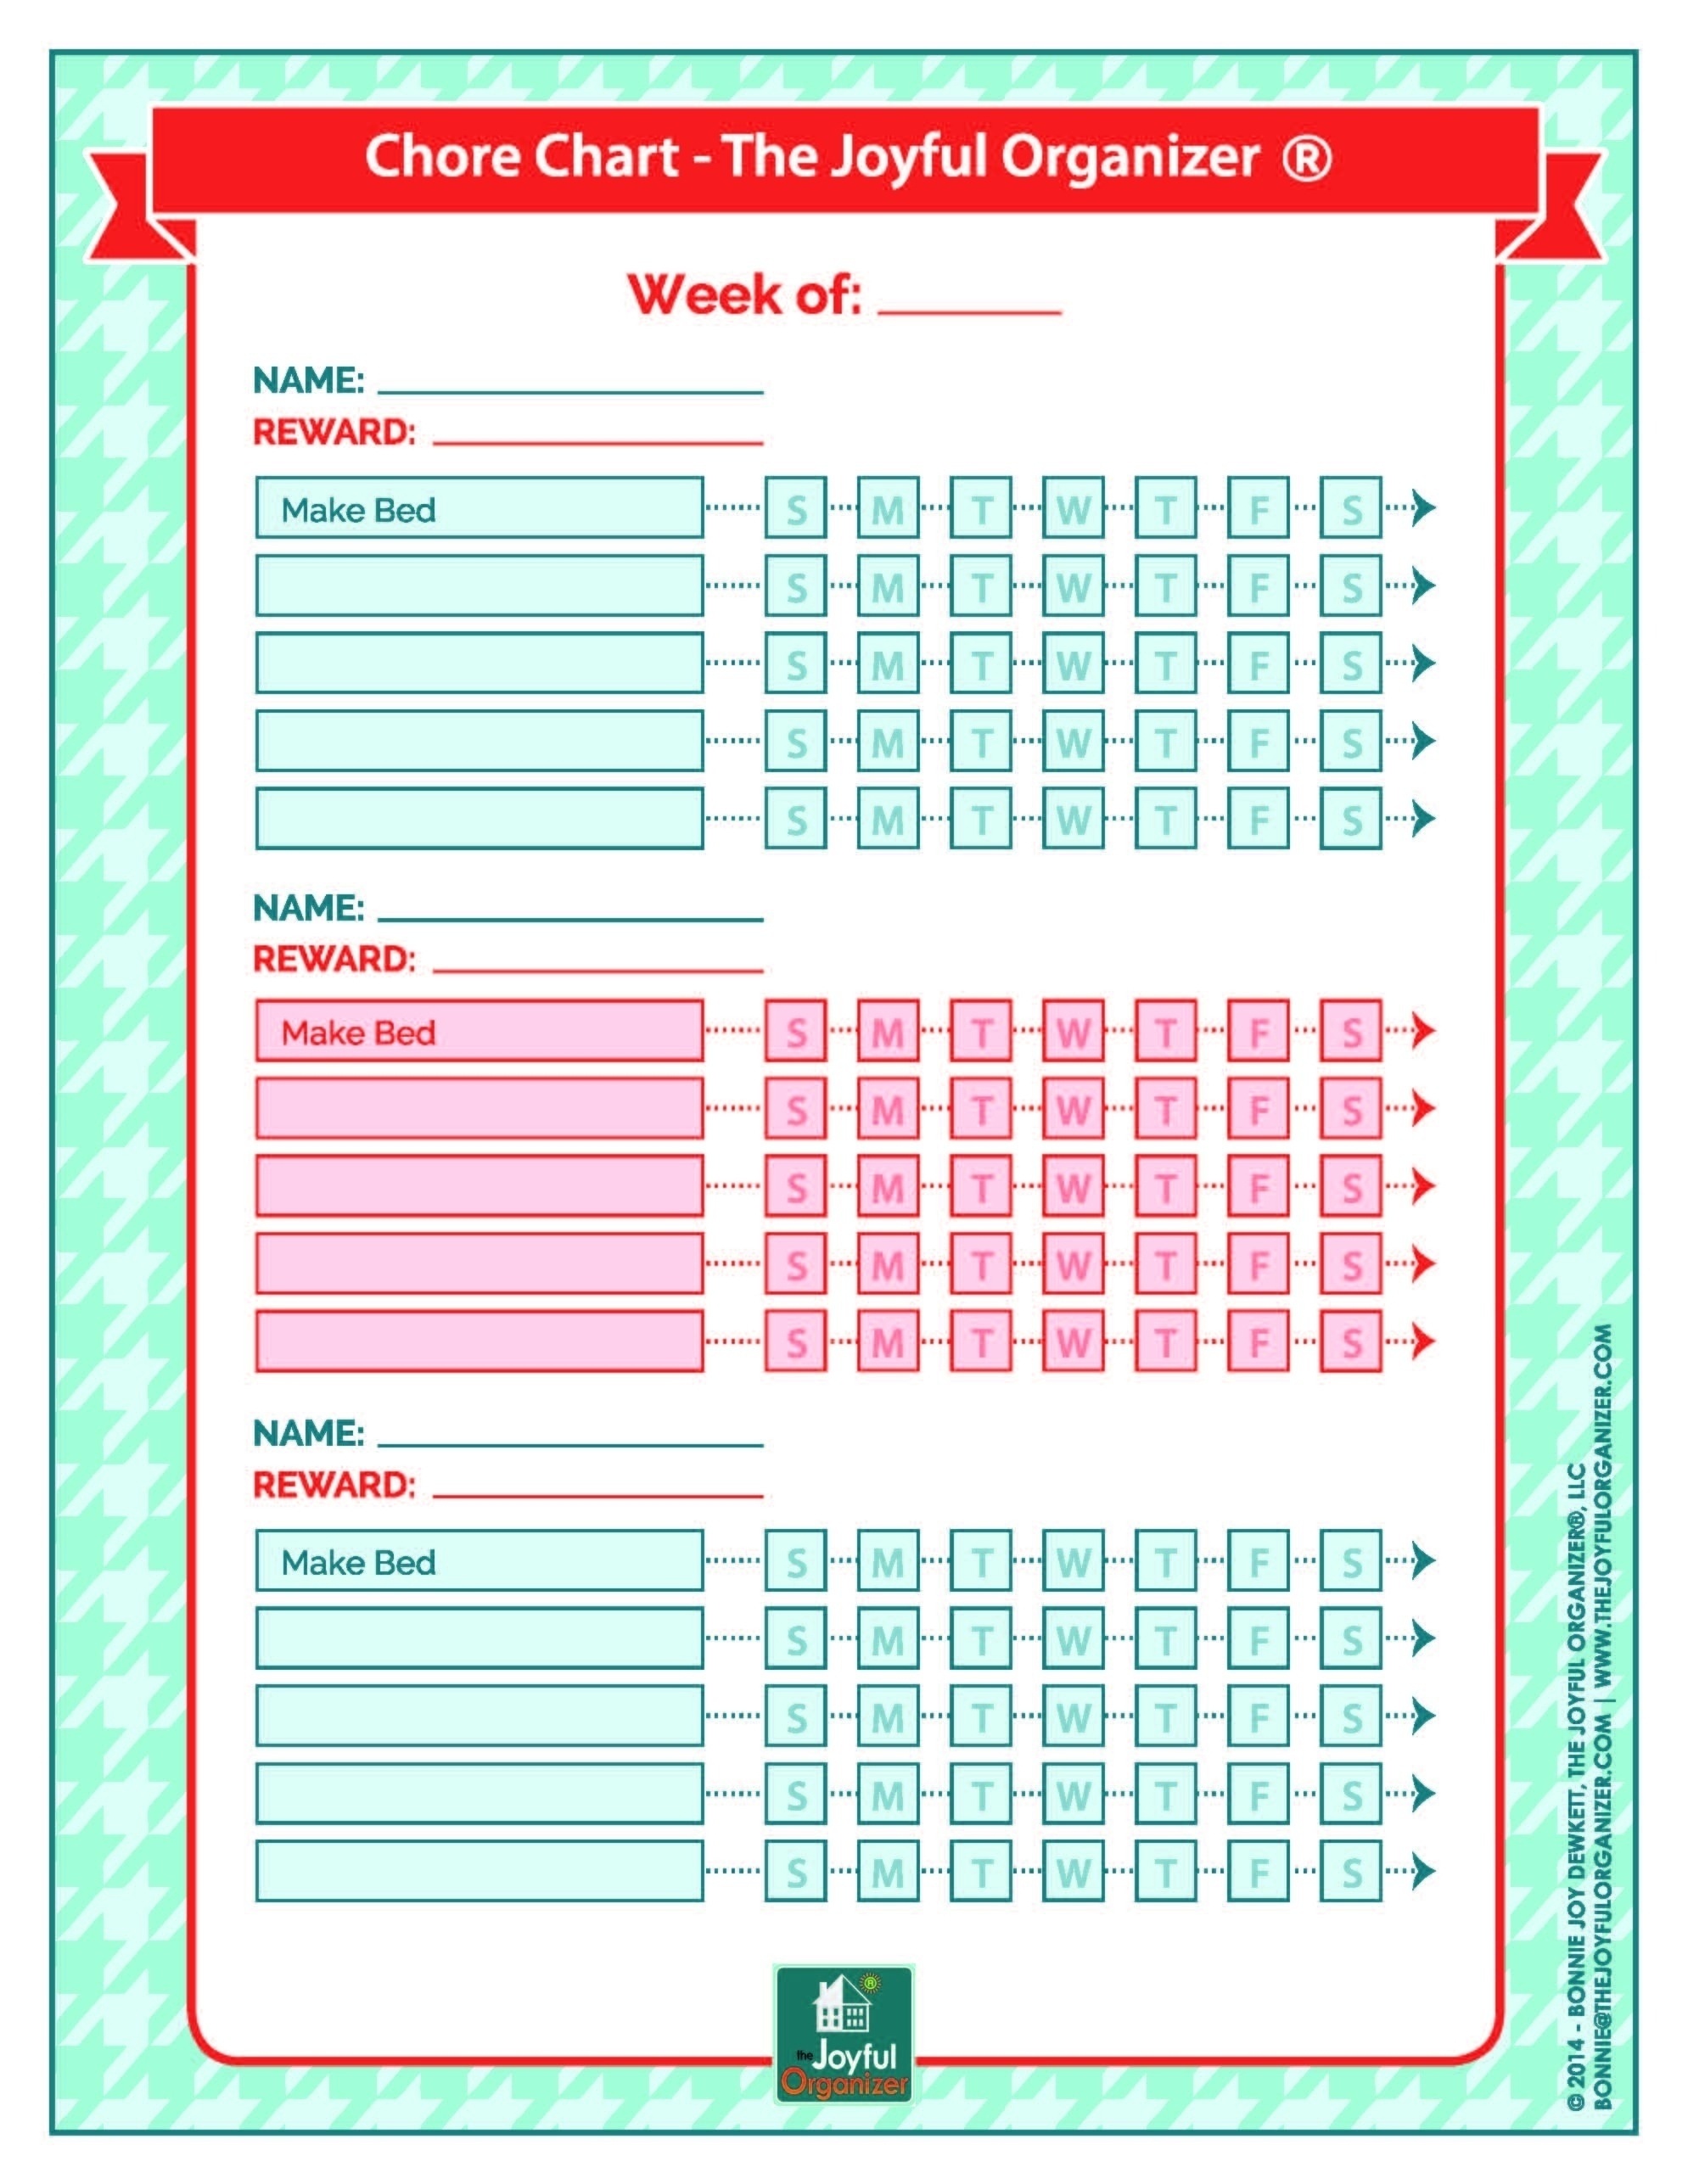 Free Printable Chore Charts For Multiple Children - Tutlin.psstech.co - Free Printable Chore Charts For Multiple Children